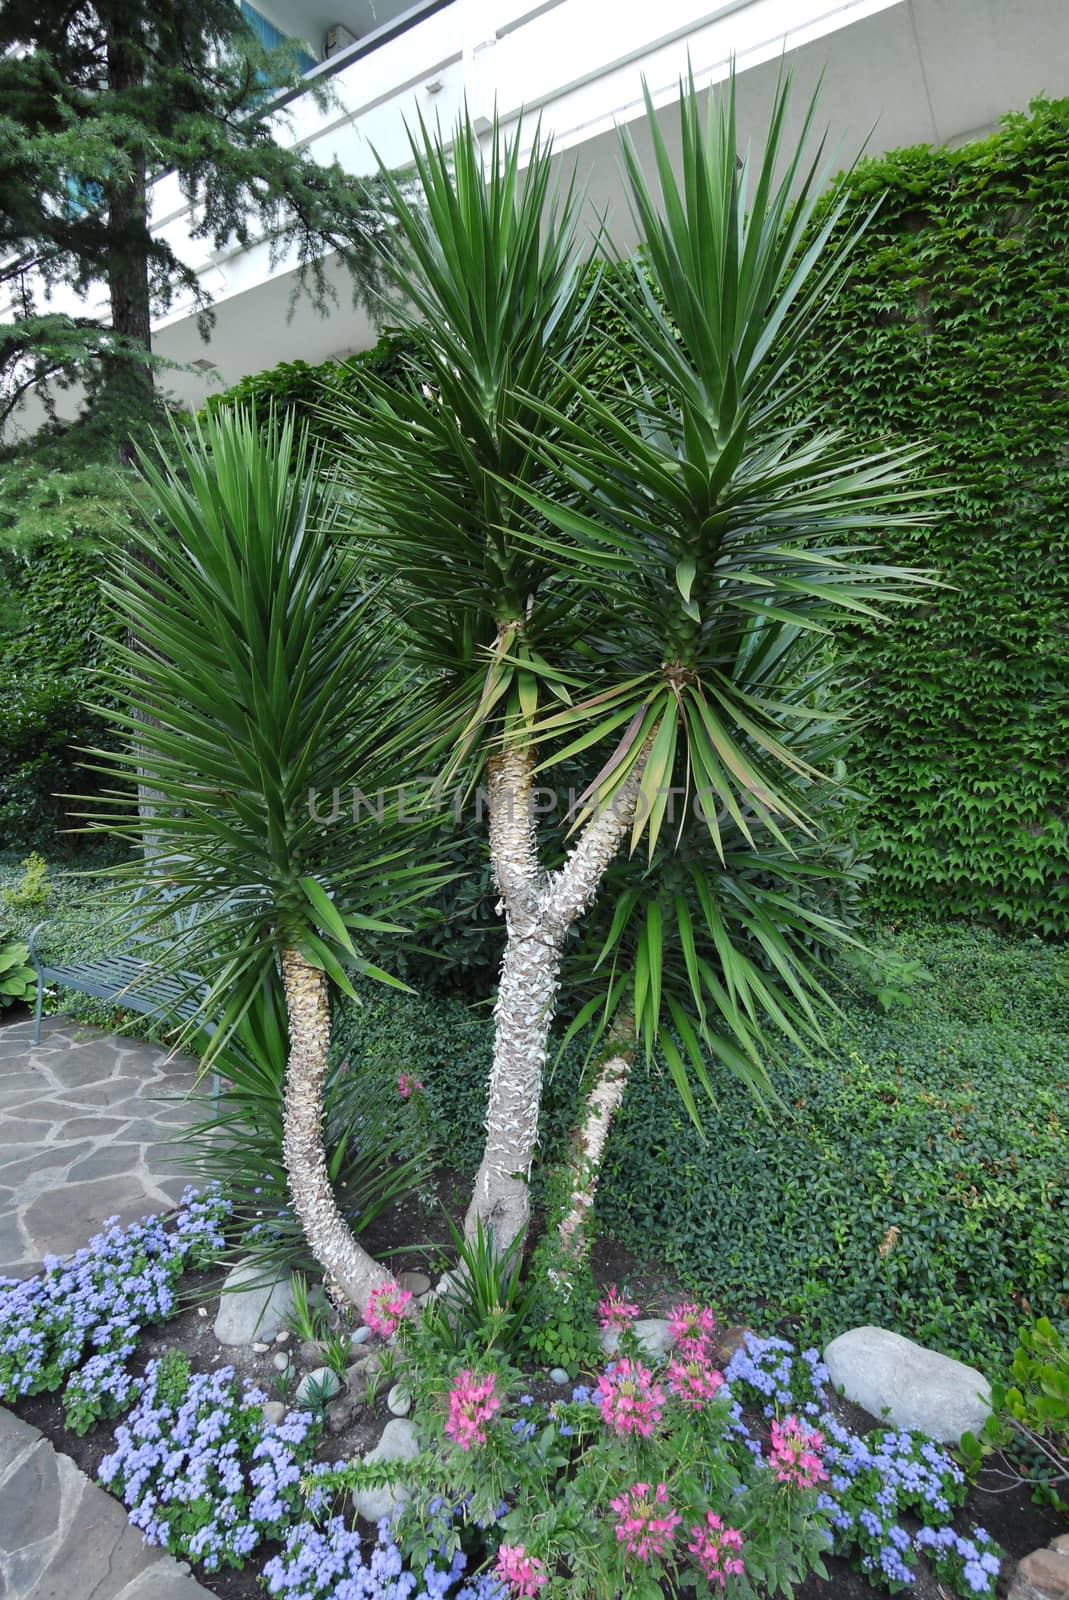 A large green yucca on a flower bed with colorful flowers and ornamentally carved bushes by Adamchuk